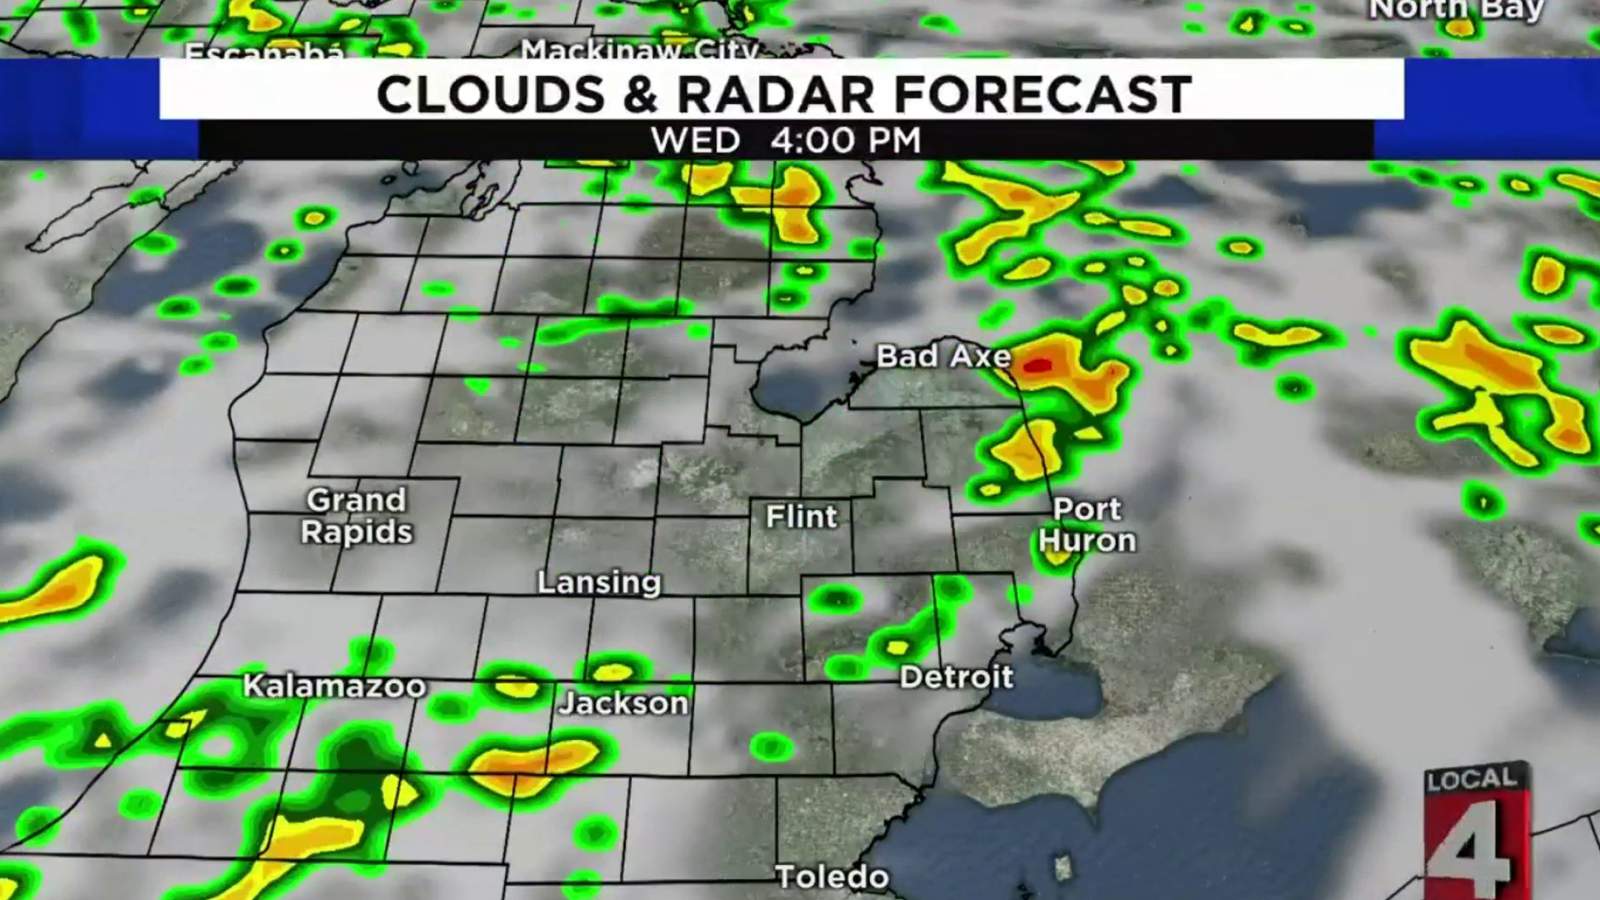 Metro Detroit weather: Get used to being cool